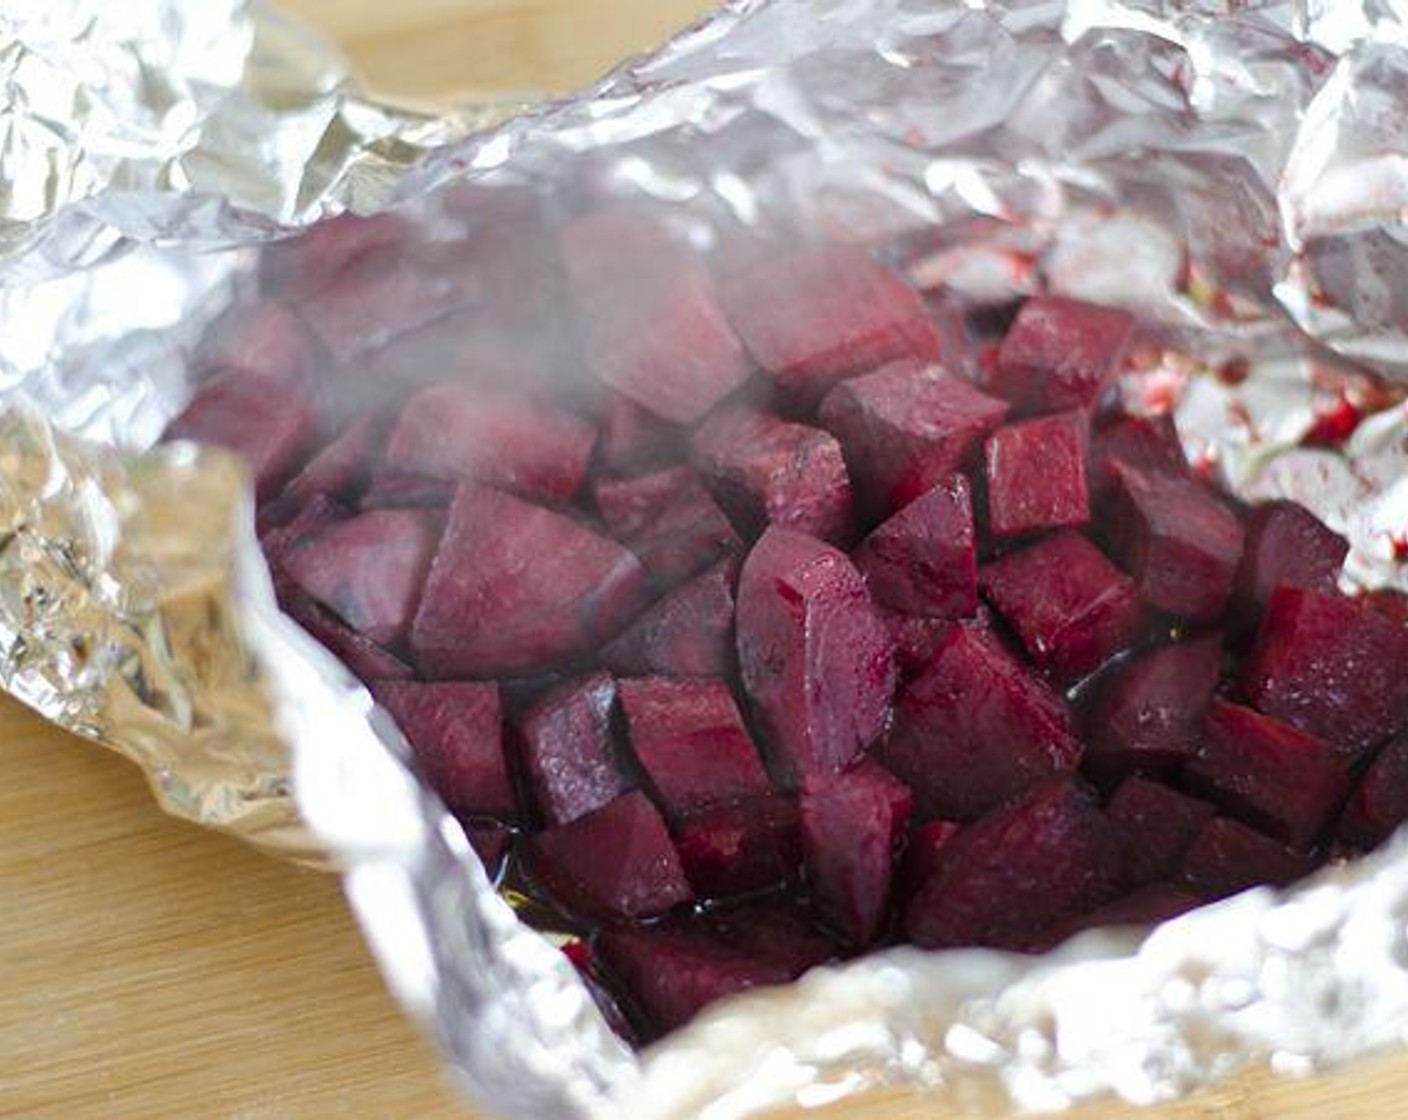 step 2 Trim, peel and chop Beet (1) into 1/2 inch cubes. Drizzle with 1 Tbsp water and place in on aluminum foil, fashioning the foil into a sealed pouch. Cook for 40 minutes, or until fork-tender.